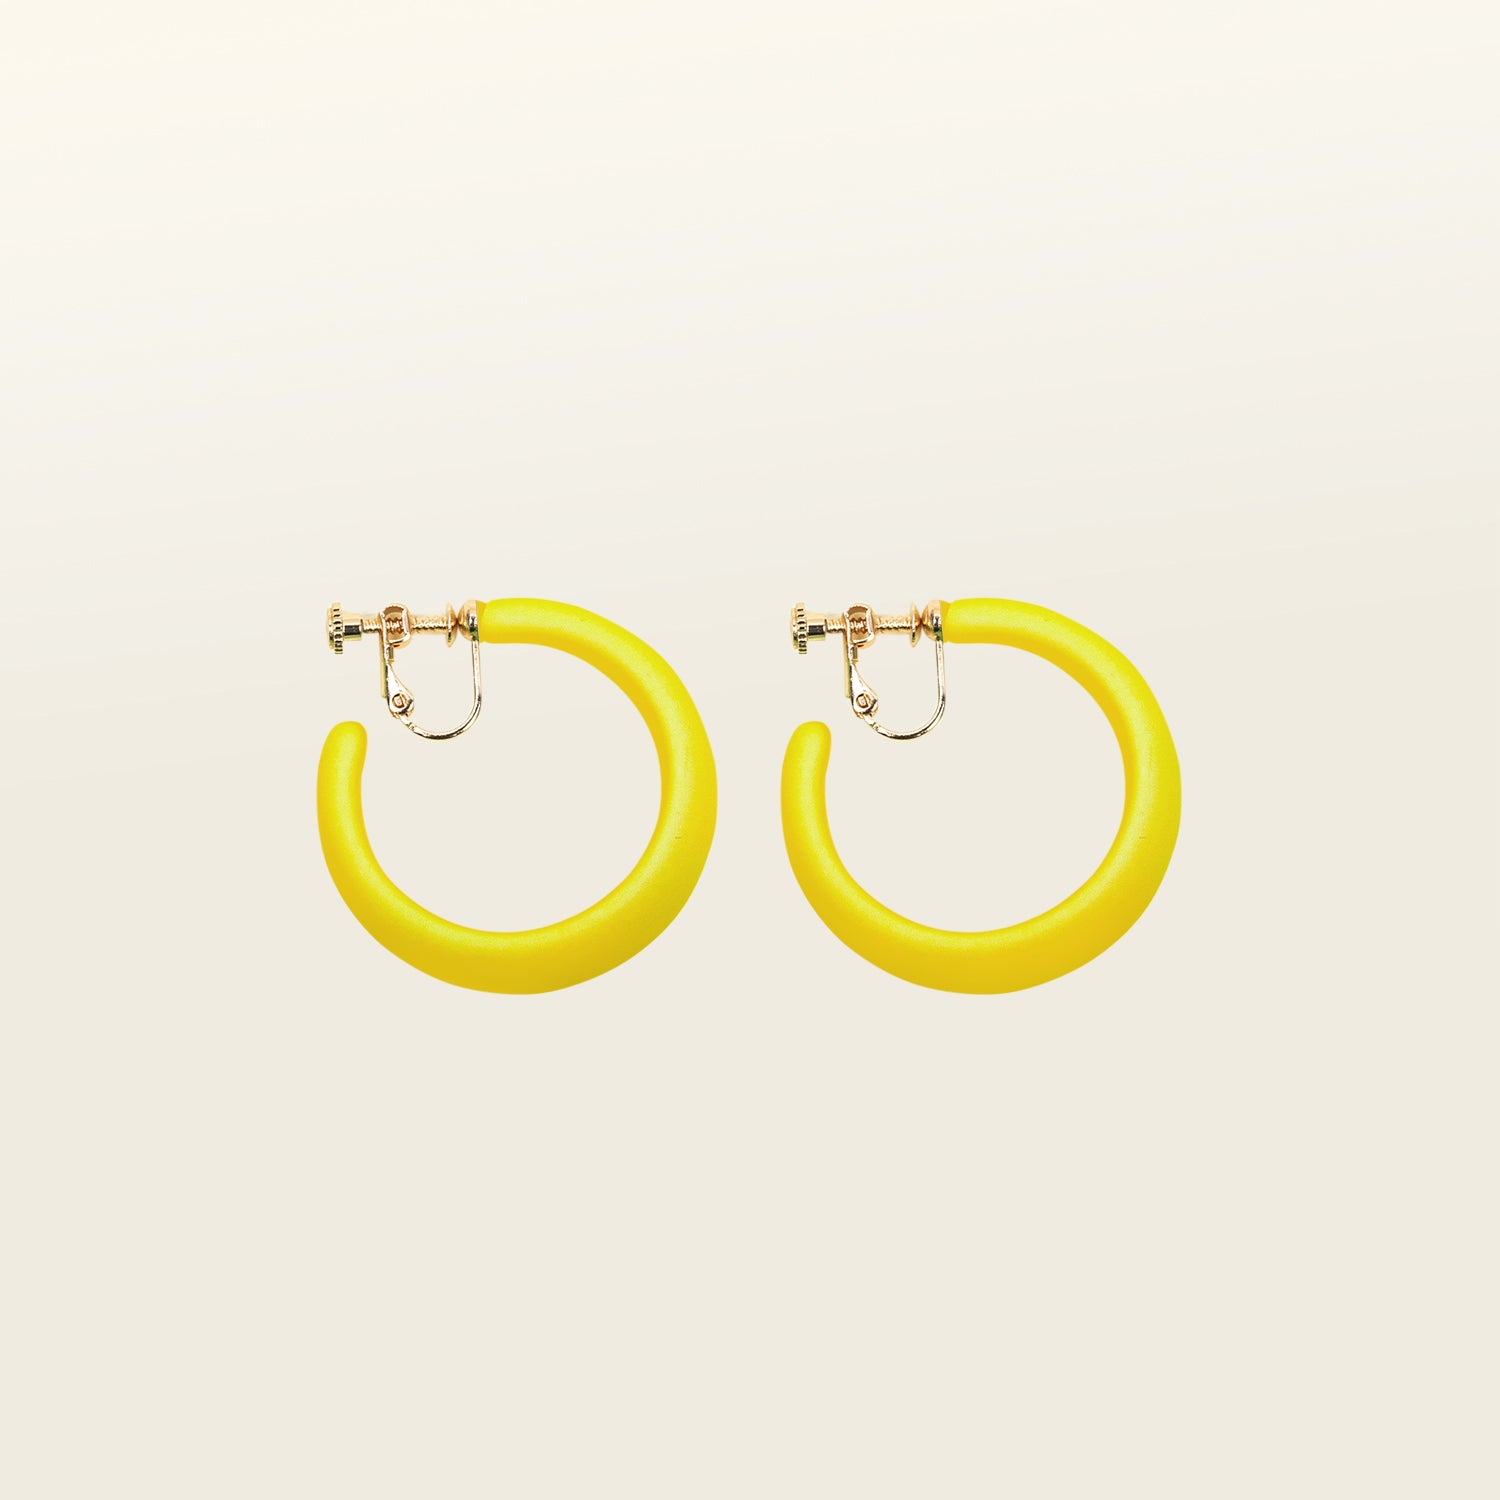 Model adorning stylish yellow clip-on hoop earrings with manual adjustability. These earrings are perfect for all ear types, ensuring a secure and comfortable hold. Crafted from gold tone copper metal alloy and acrylic. 